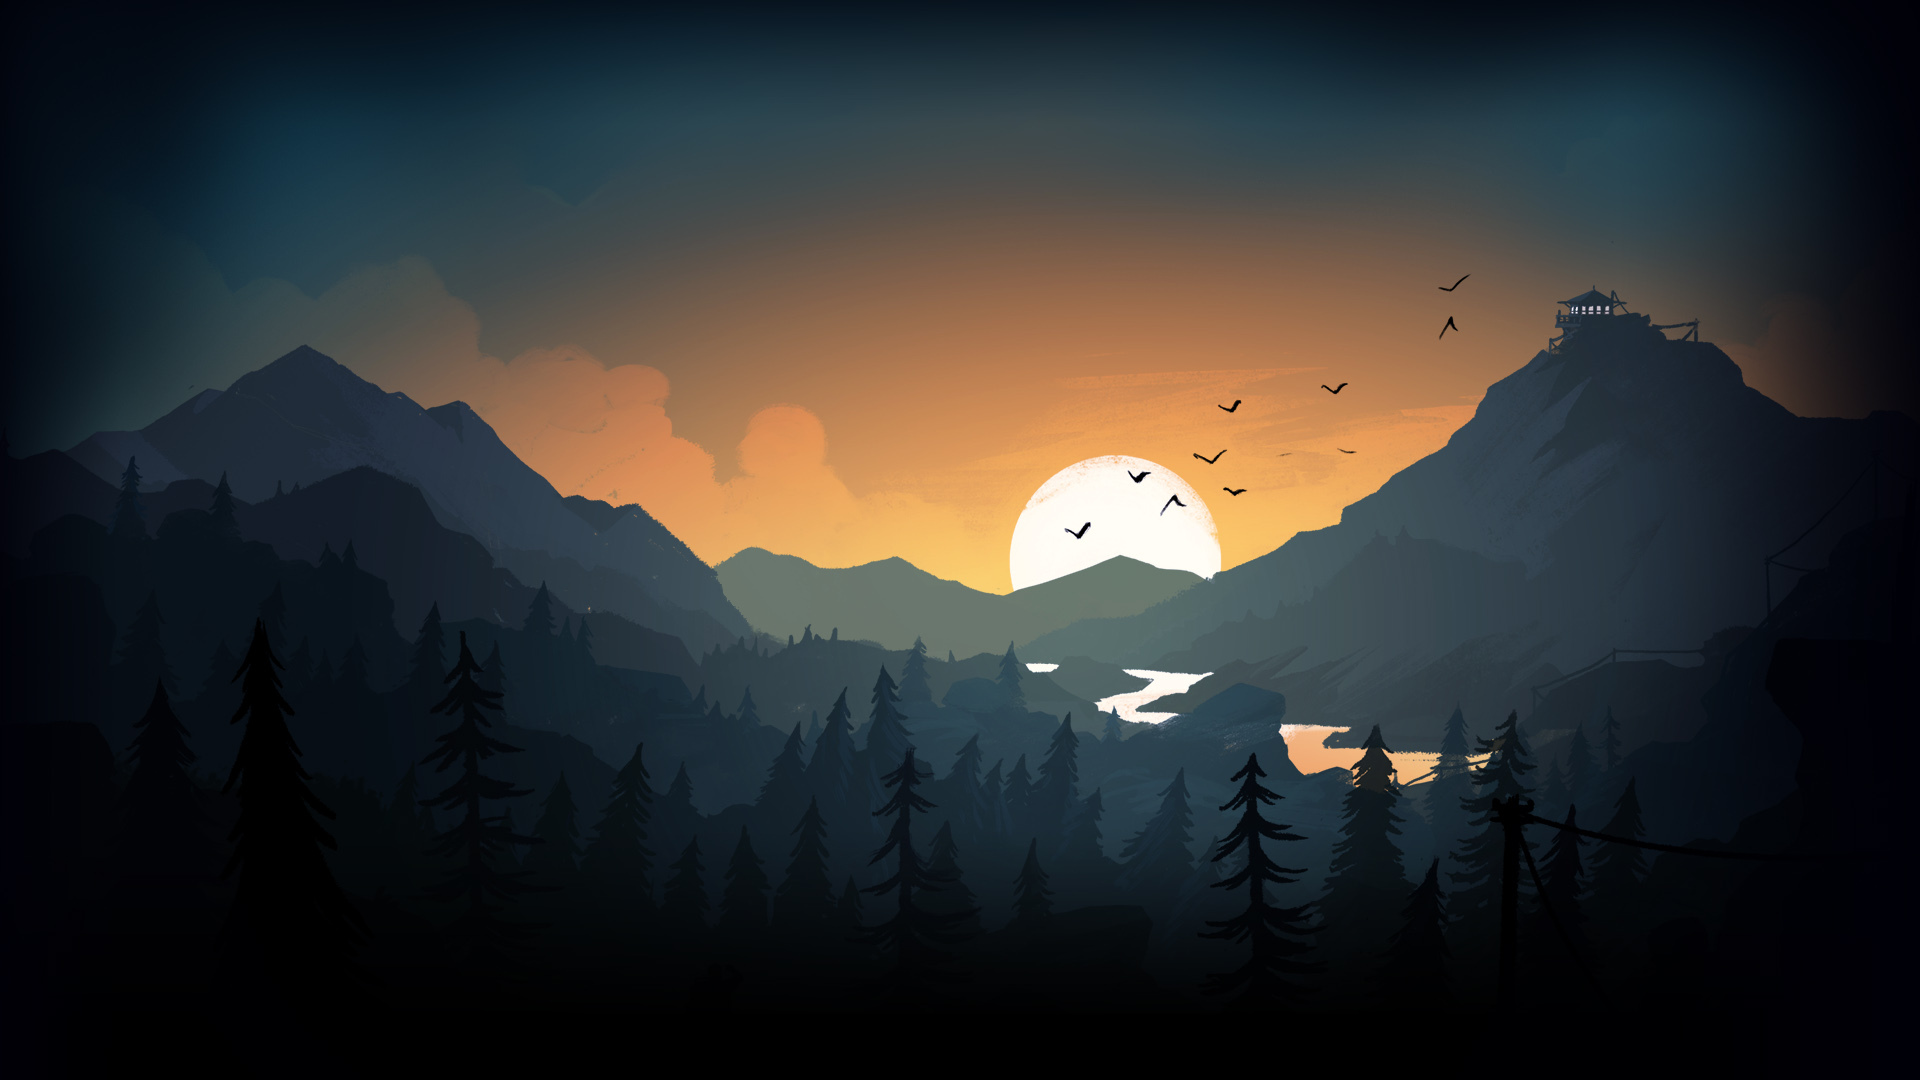  Firewatch HQ Background Images